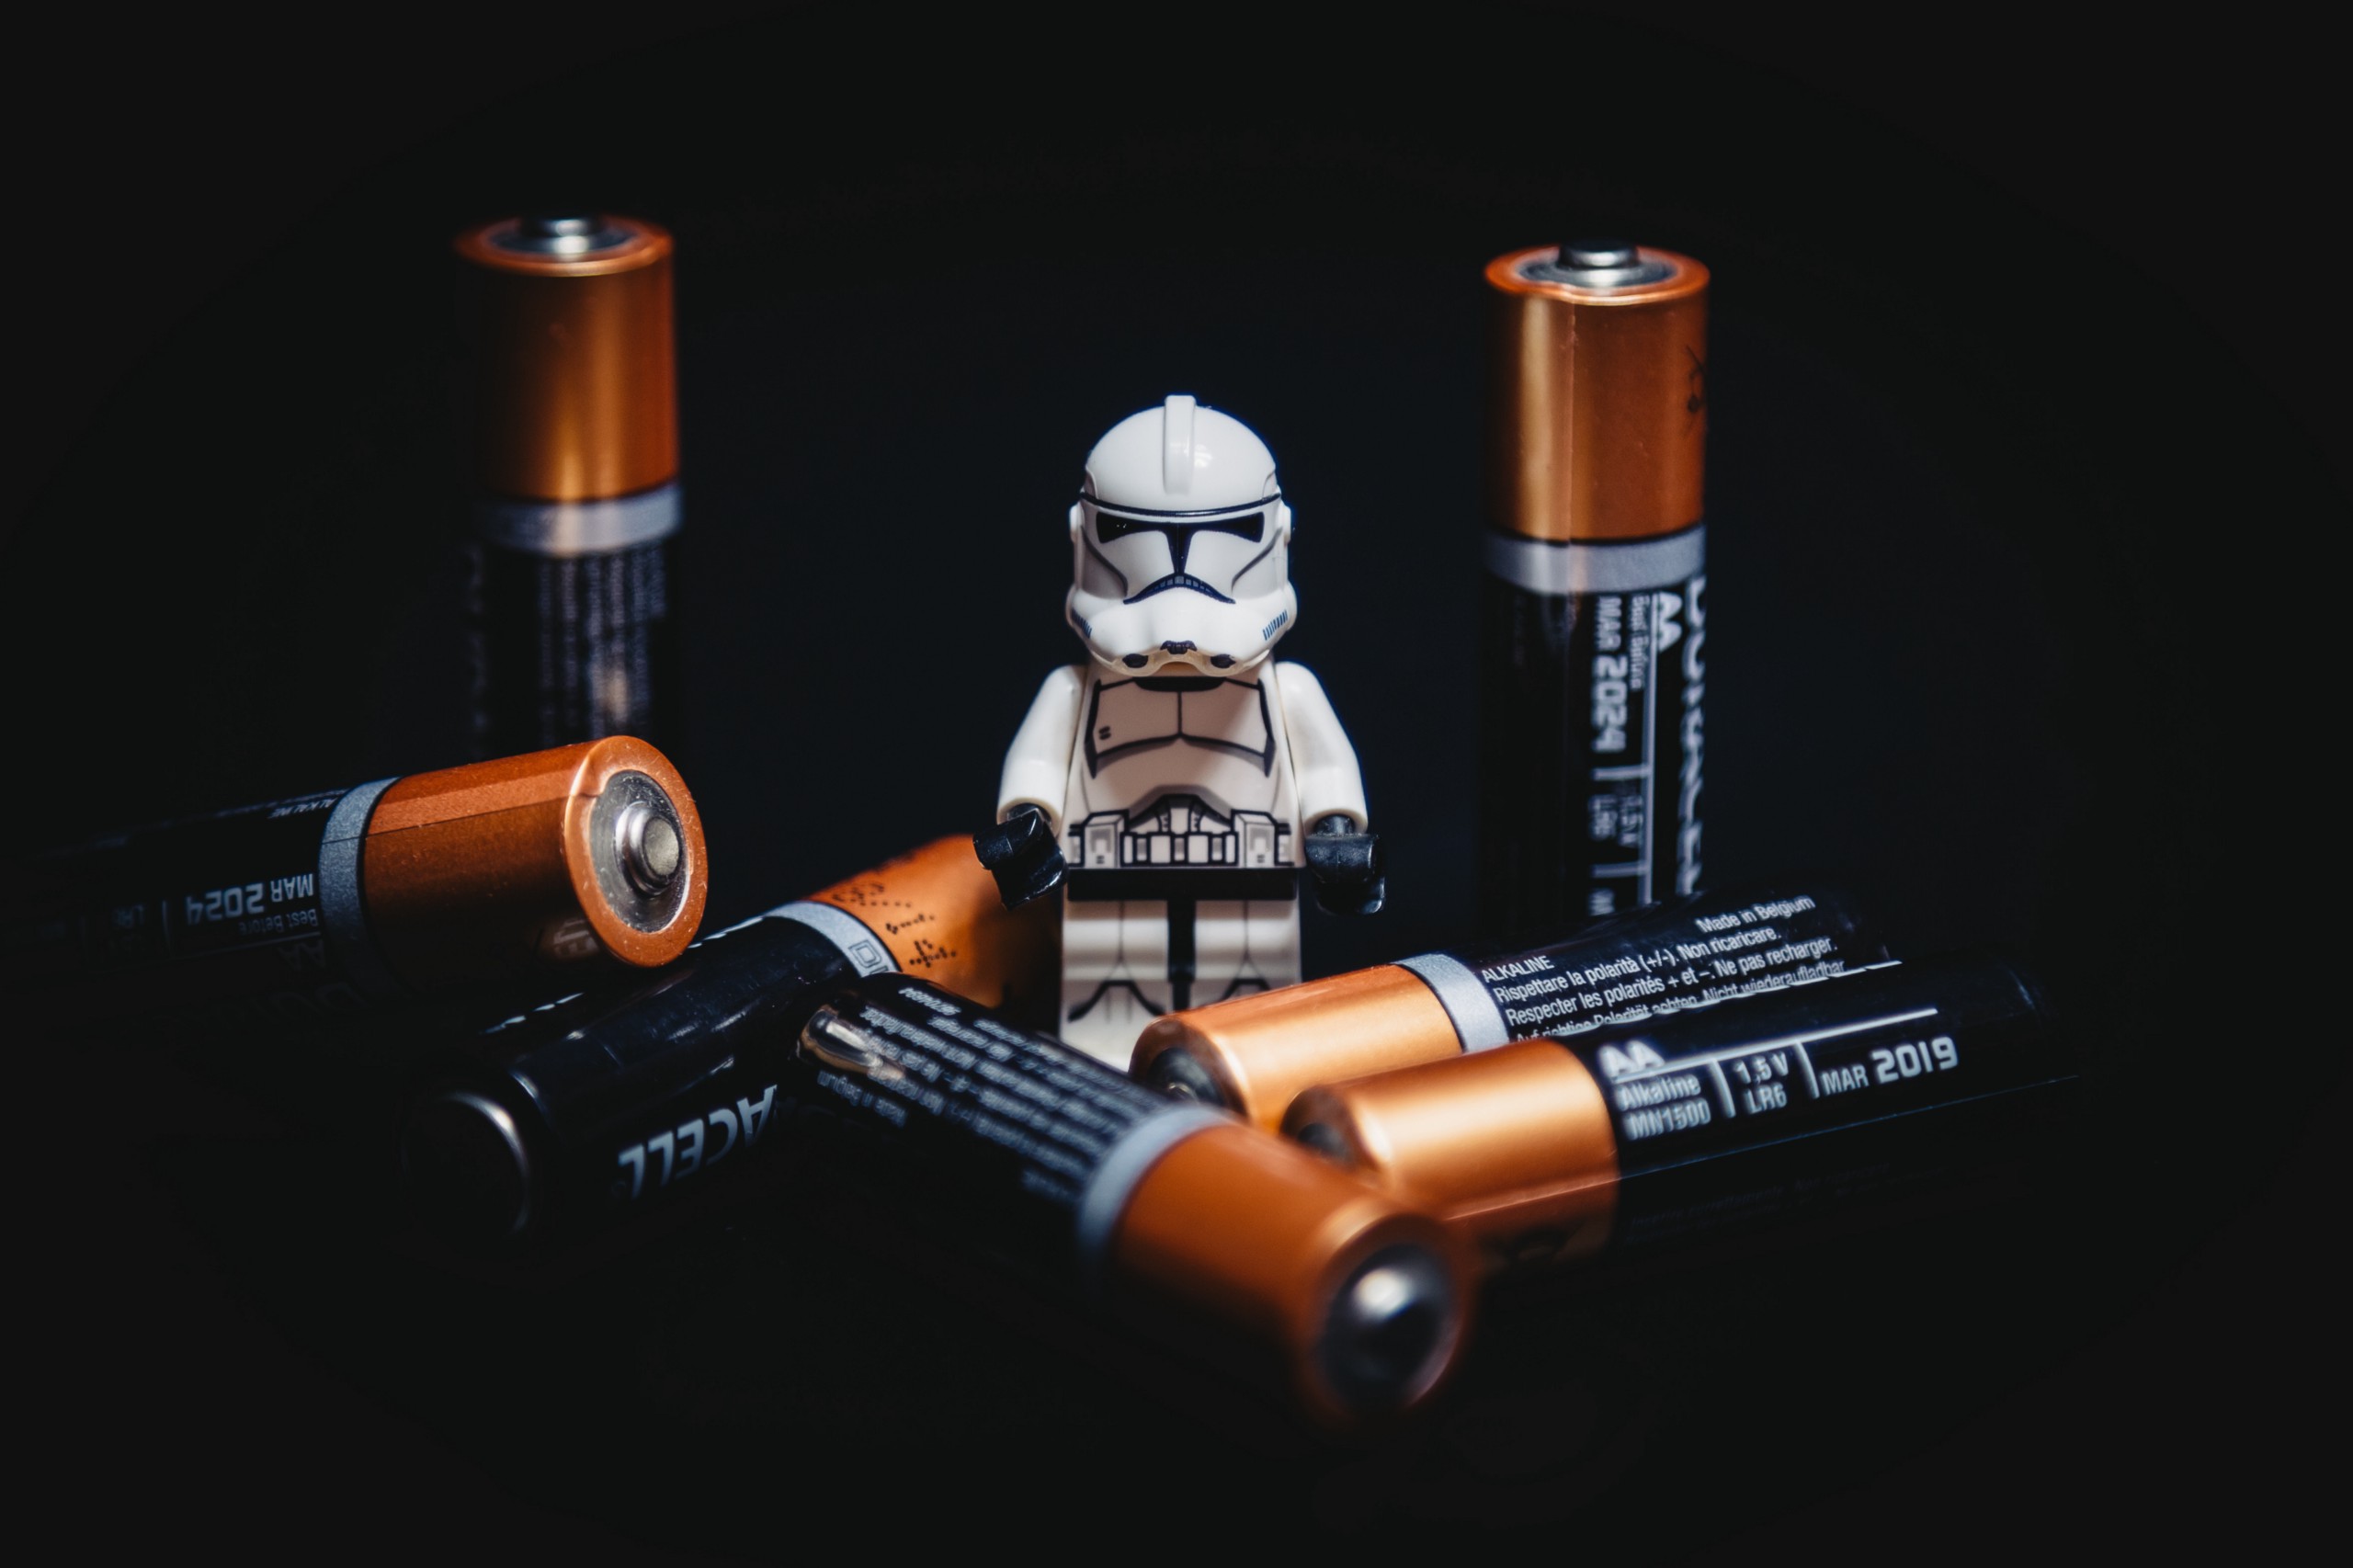 lego clone surrounded by 7 batteries, black background